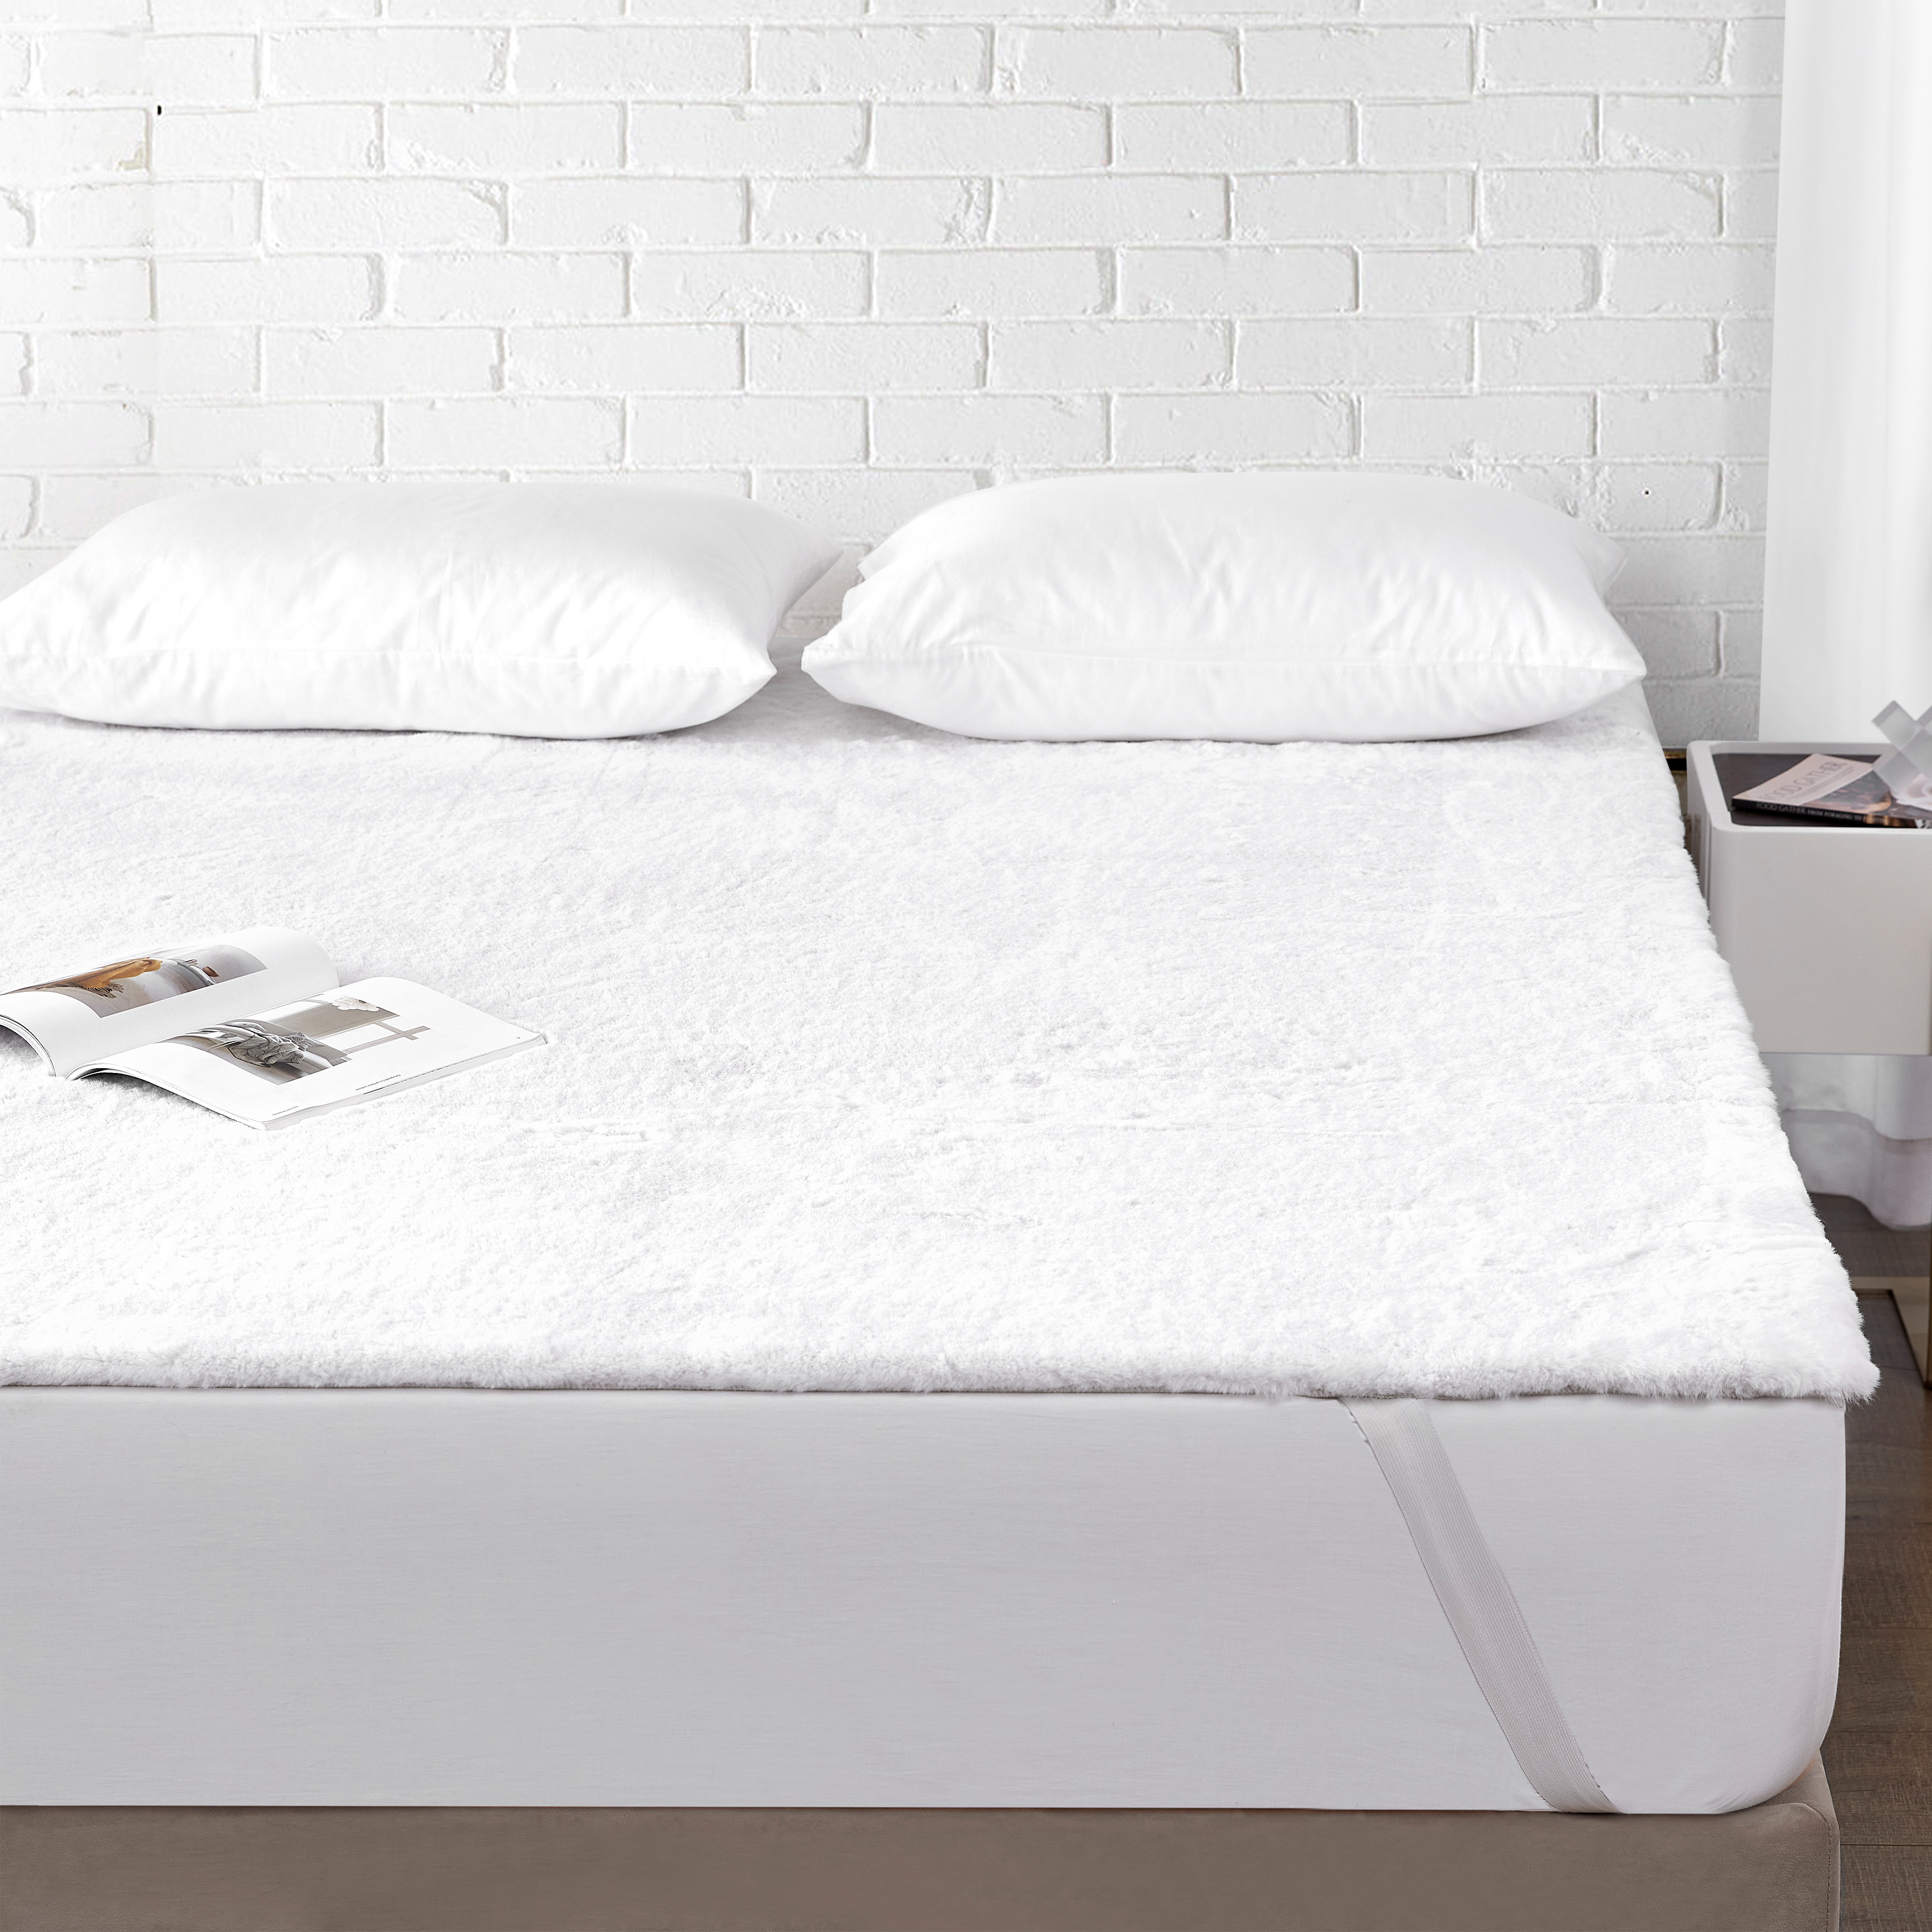 Chunky Bunny - Coma Inducer® Full XL Bed Topper - White